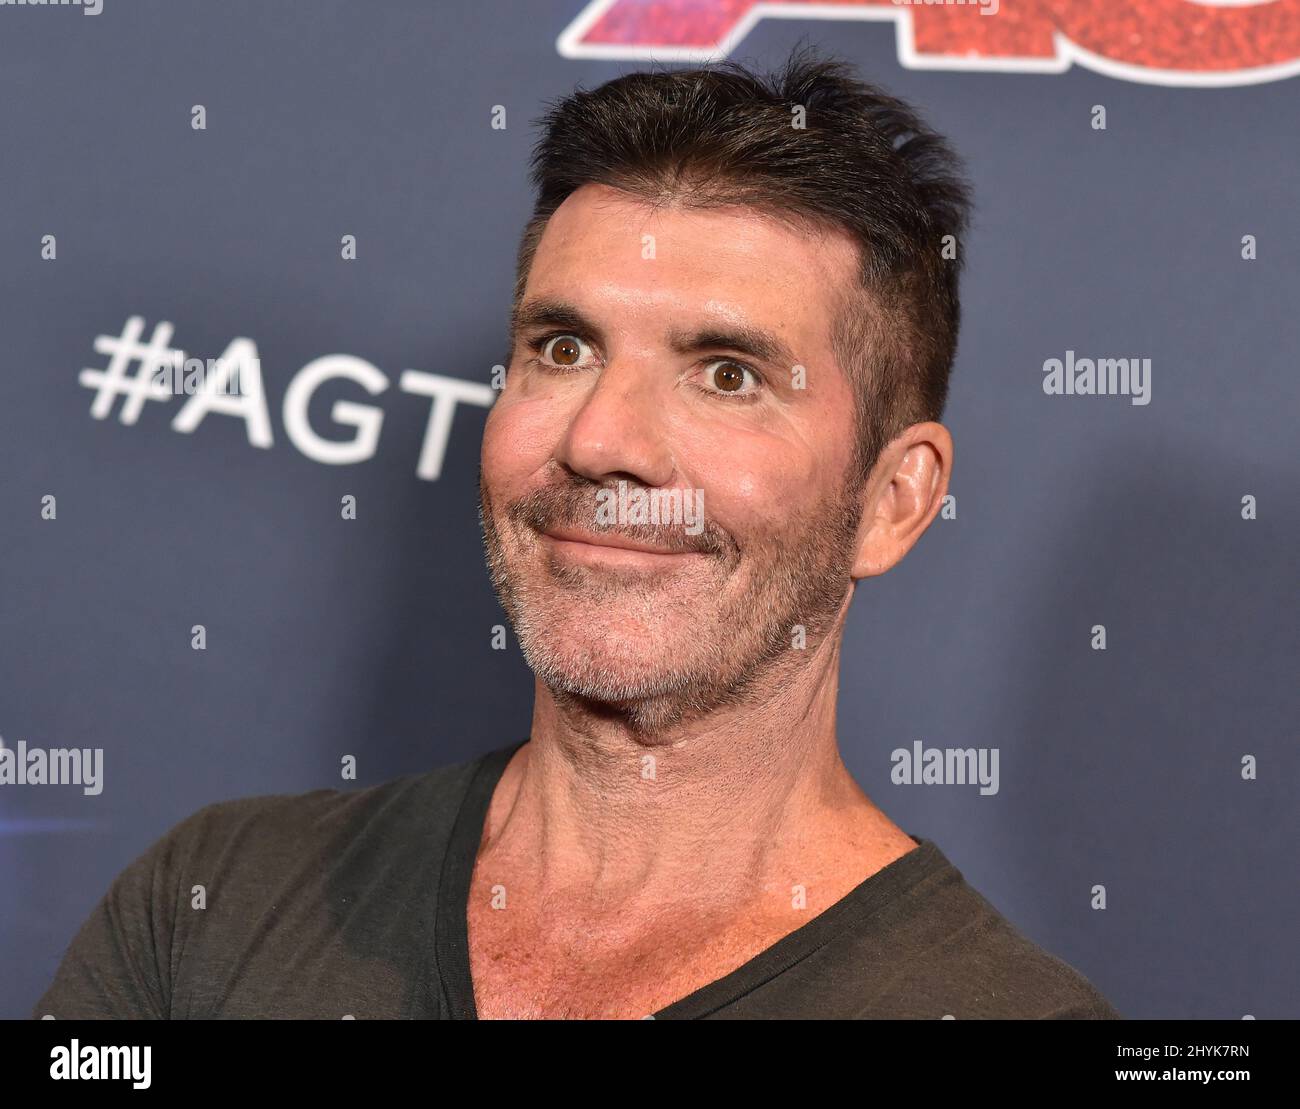 Simon Cowell arriving to the 'America's Got Talent' Semi Finals at